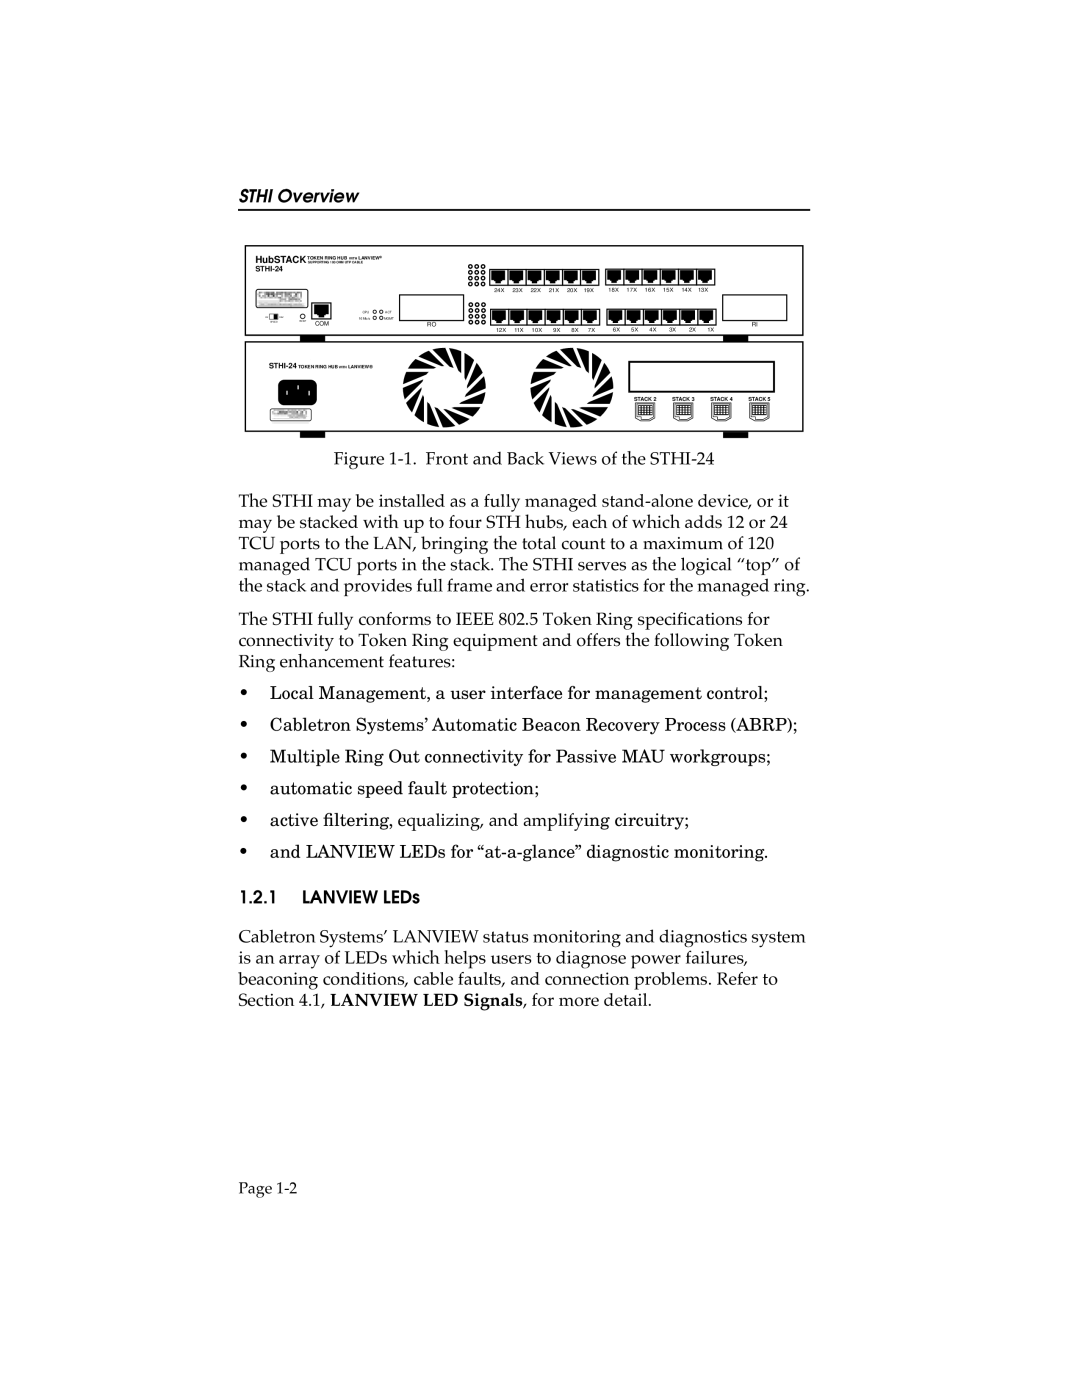 Cabletron Systems manual STHI Overview, LANVIEW LEDs 